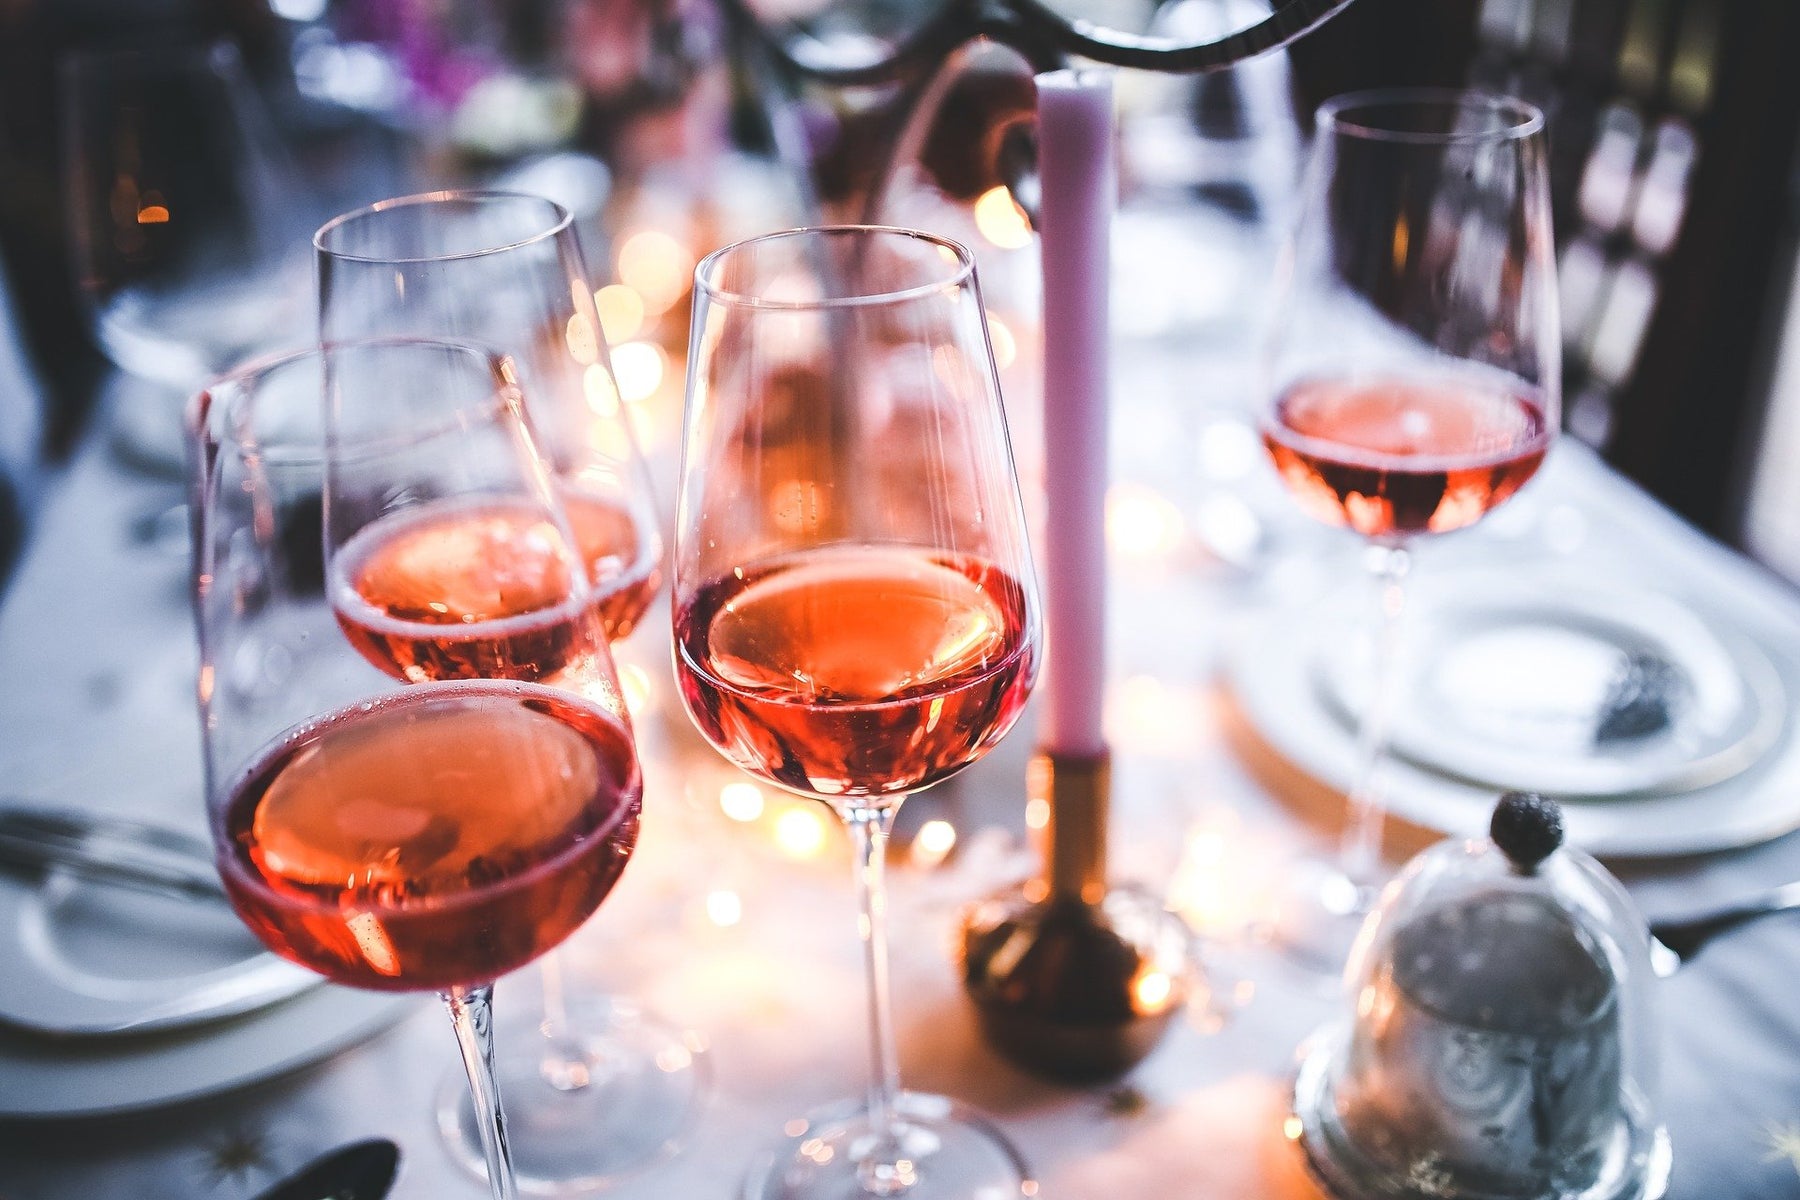 An introduction to Rosé wines!